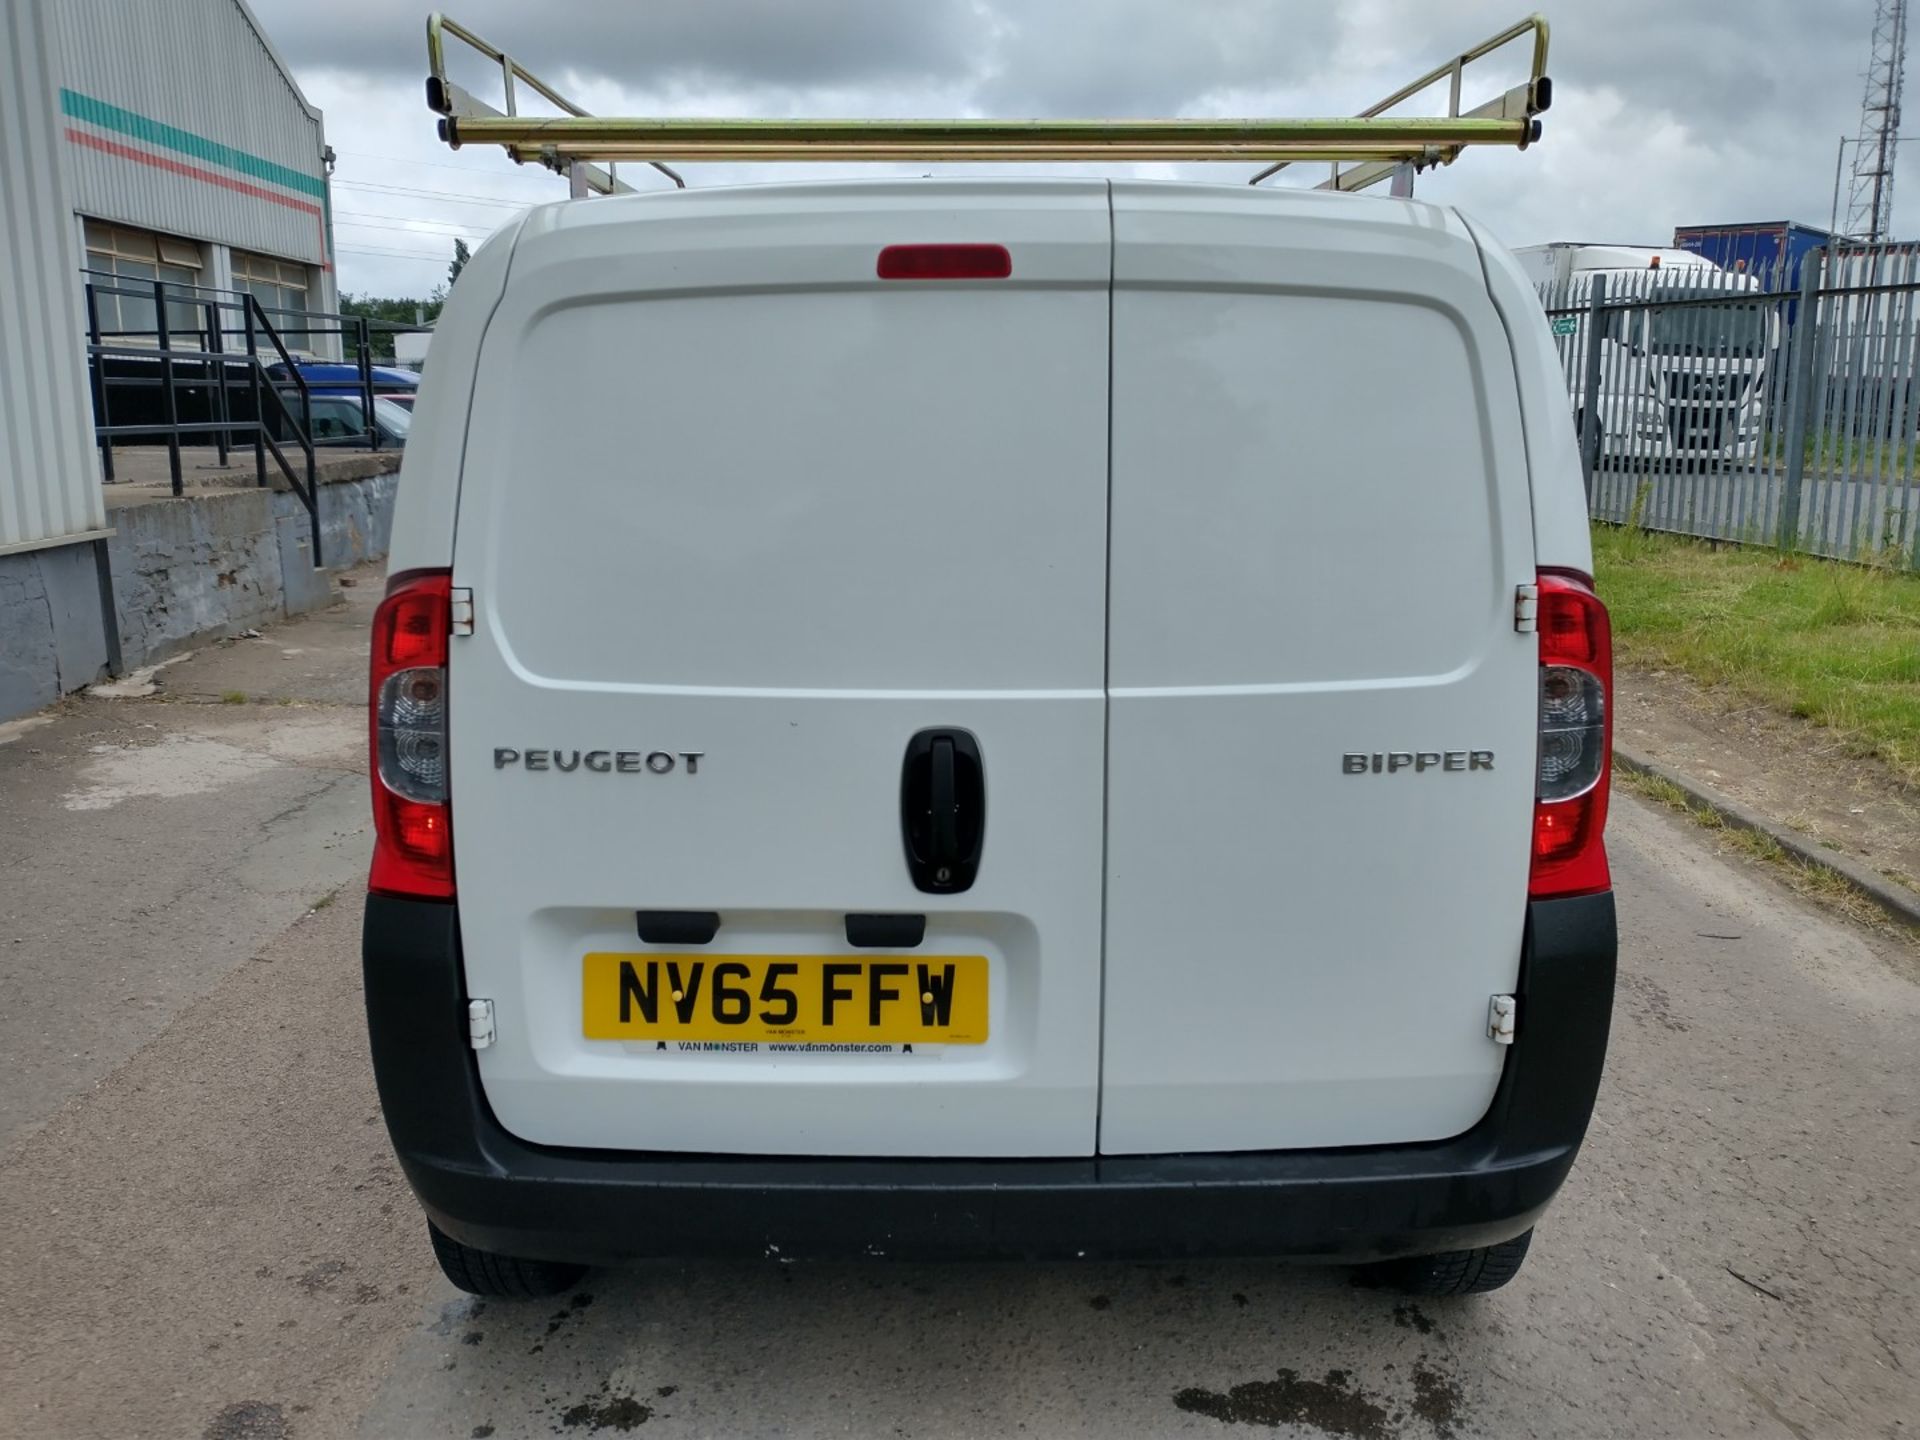 2015 Peugeot Bipper S Hdi White Panel - CL505 - Ref: VVS031 - Location: Corby, Northamptonshire106, - Image 7 of 16